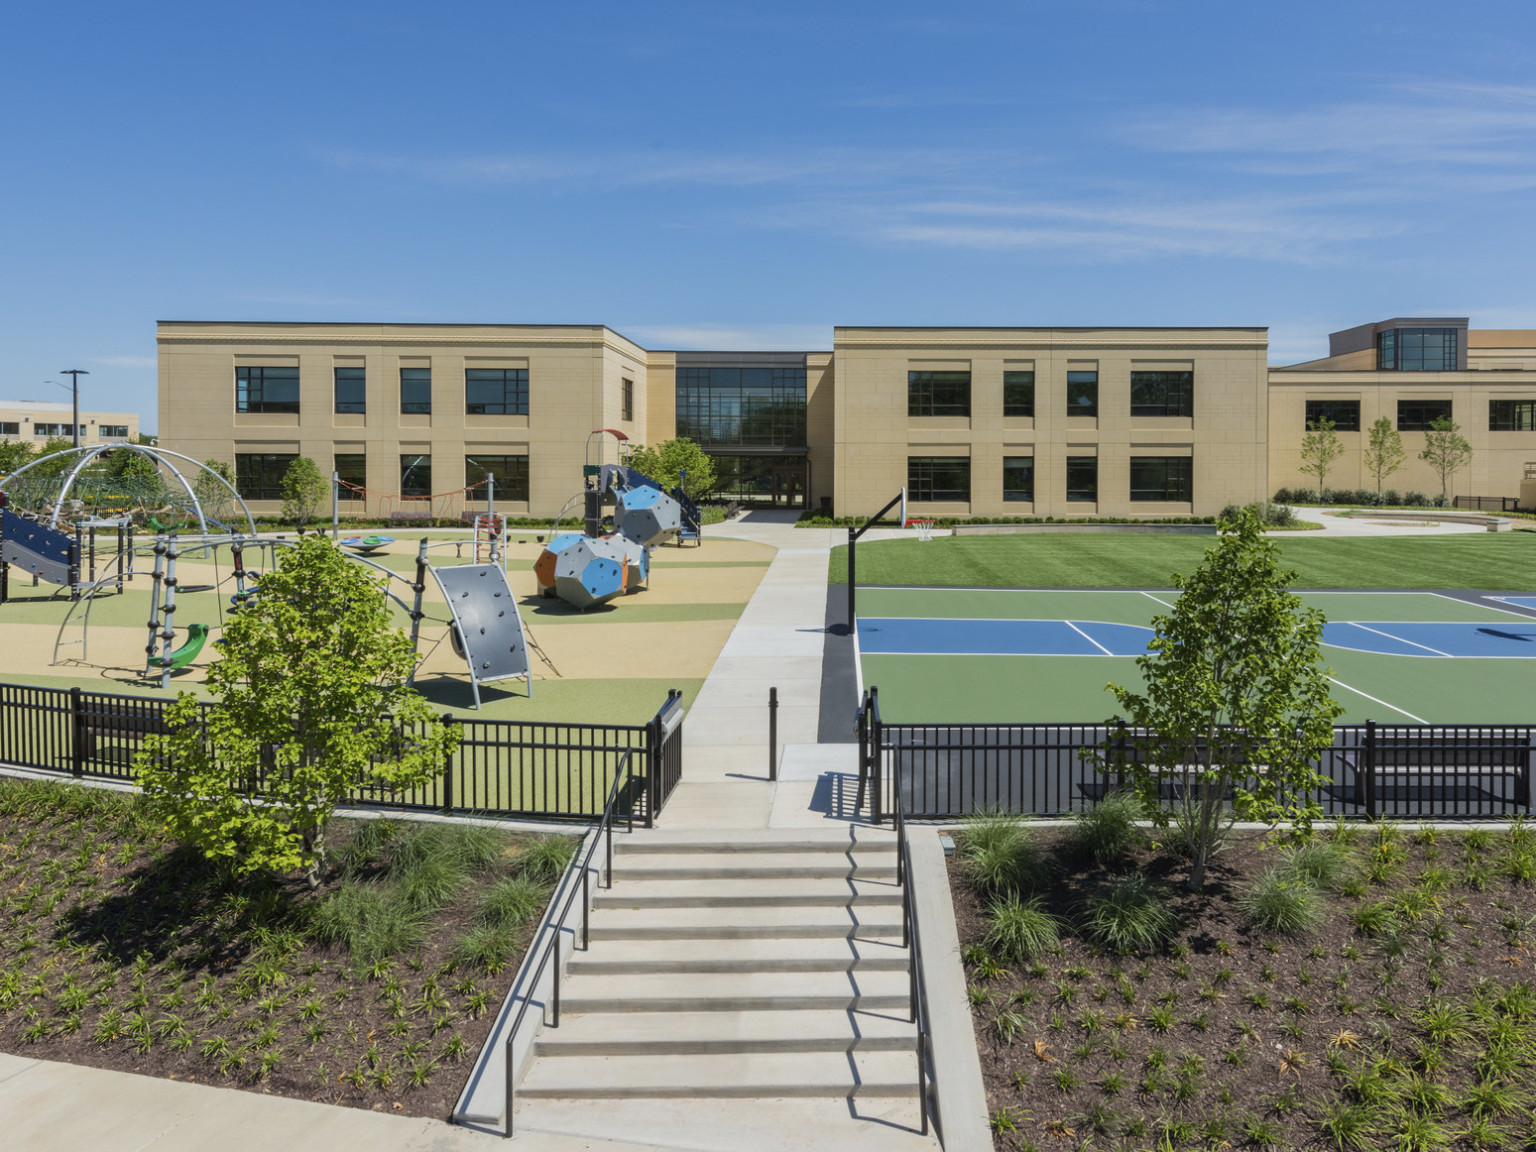 Playground and basketball court outside a two-story school built with a precast concrete façade